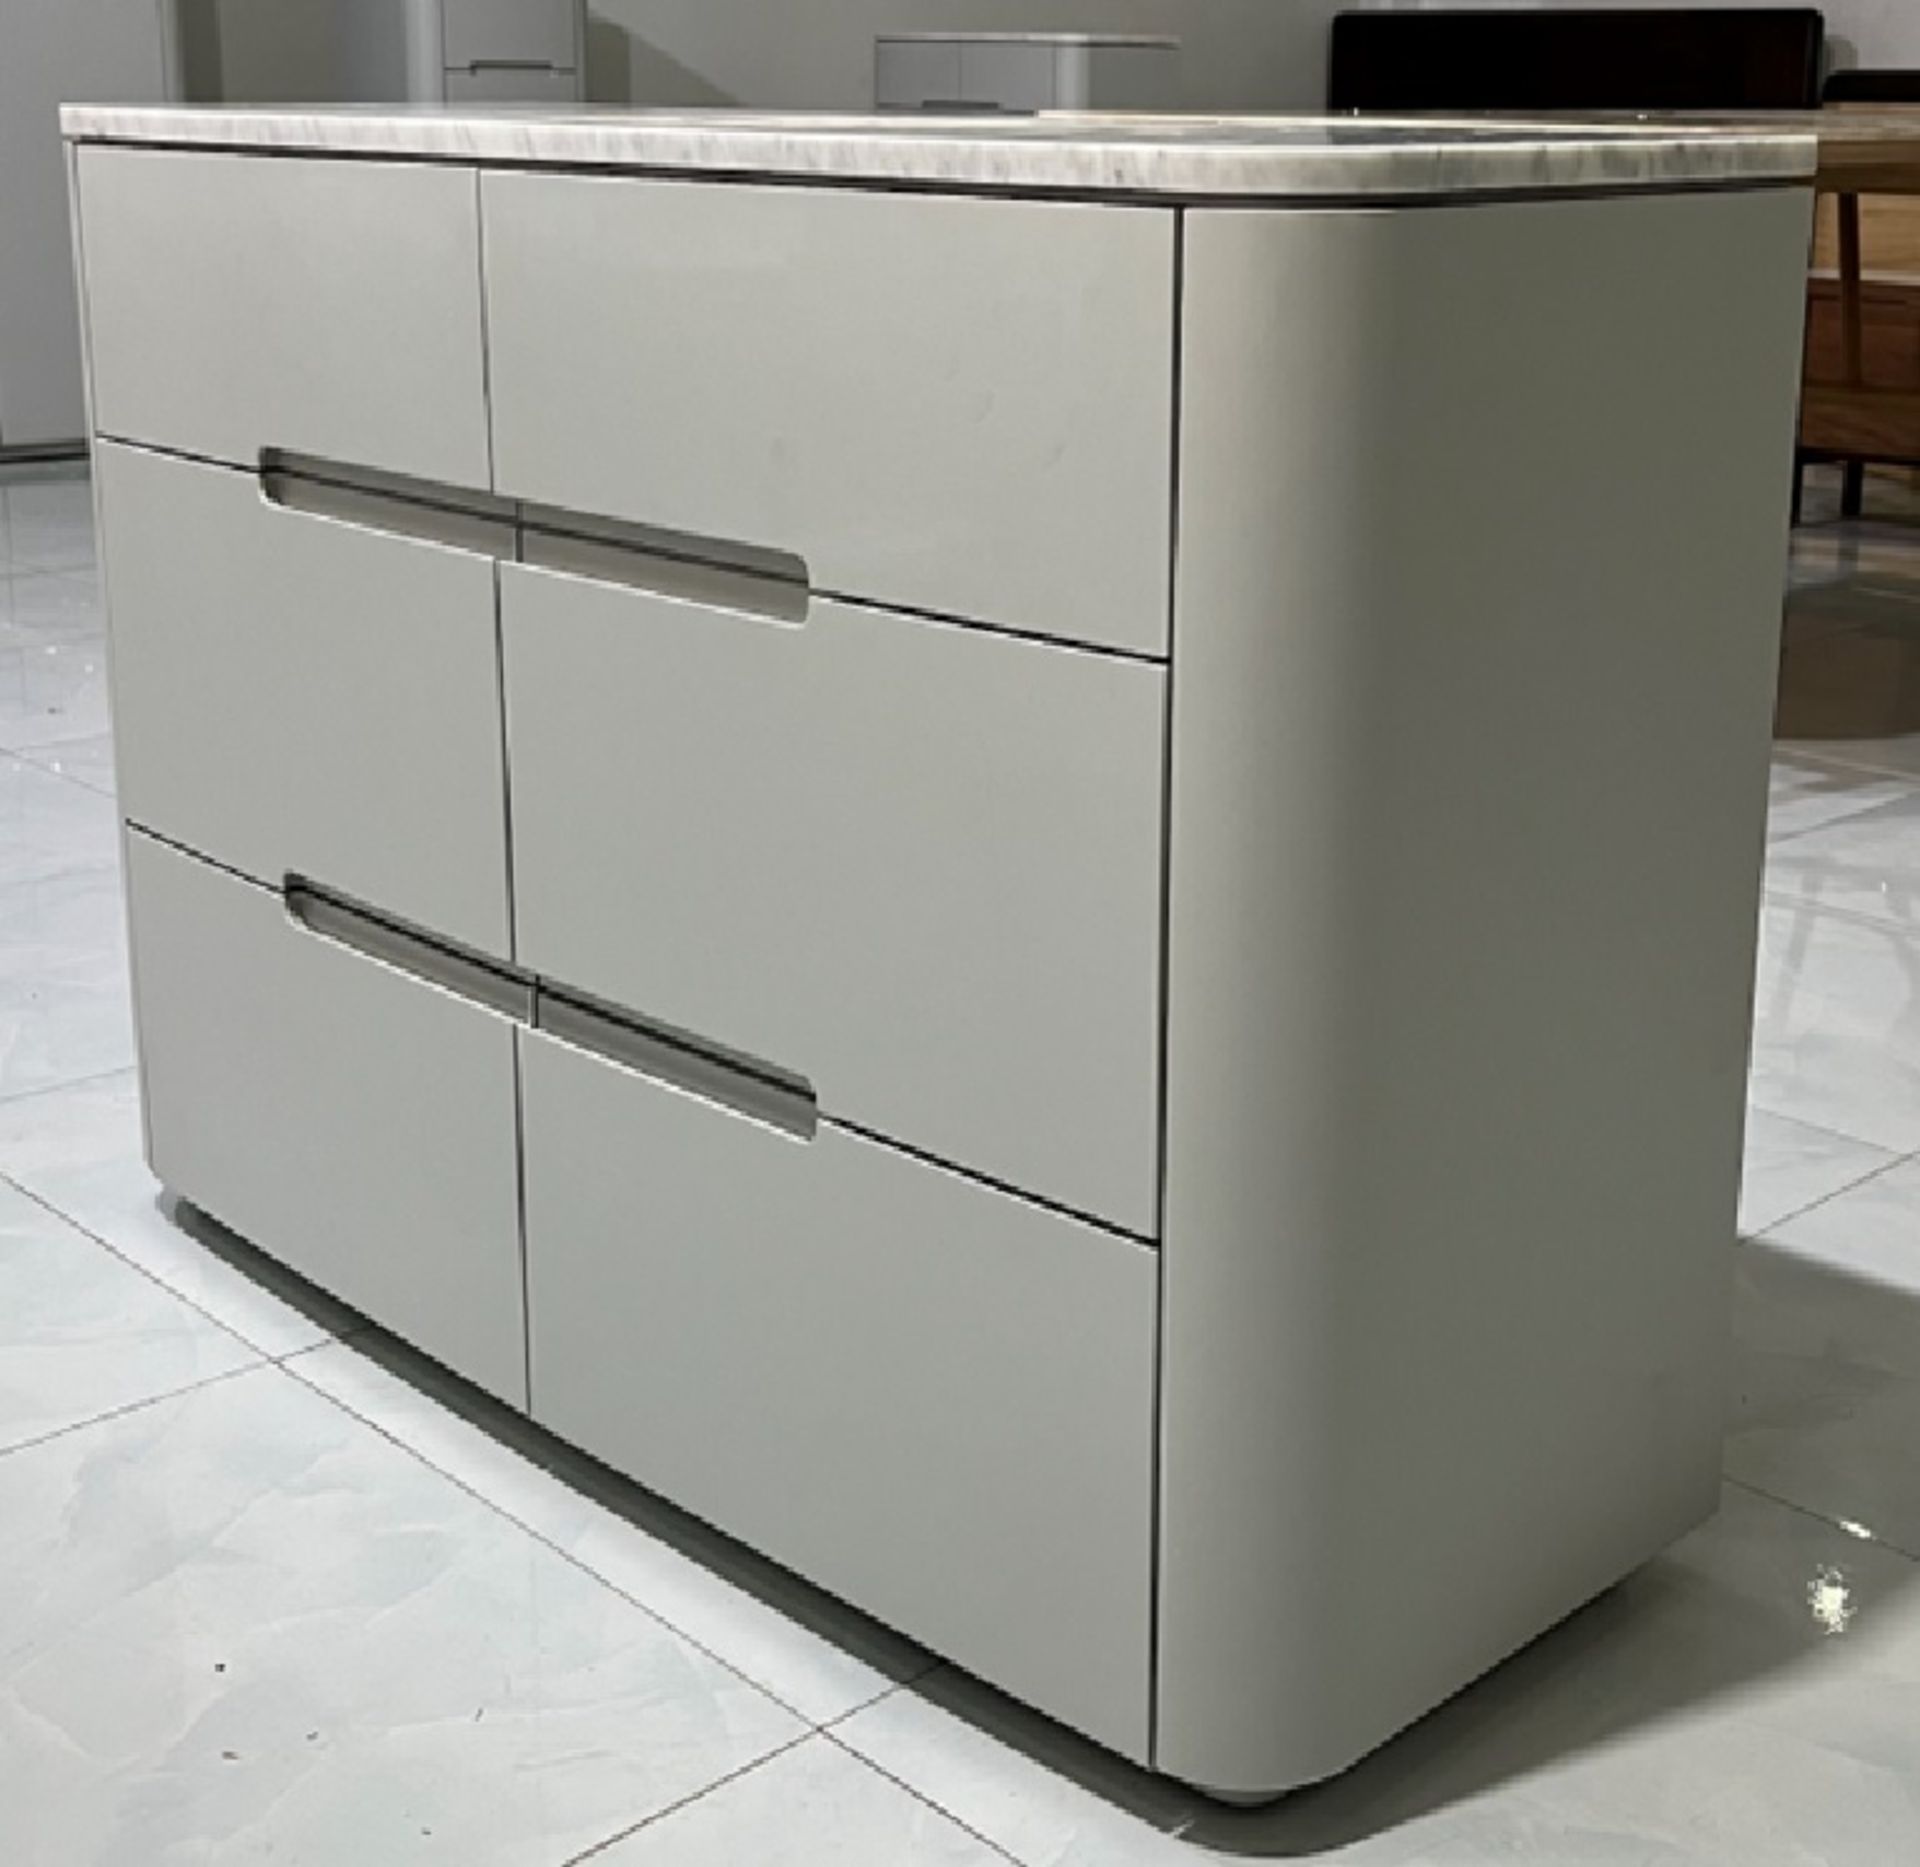 Florence 6 Drawer Bedroom Chest With Italian Carrara Marble Top Sample Product 120 x 45 x 75cm